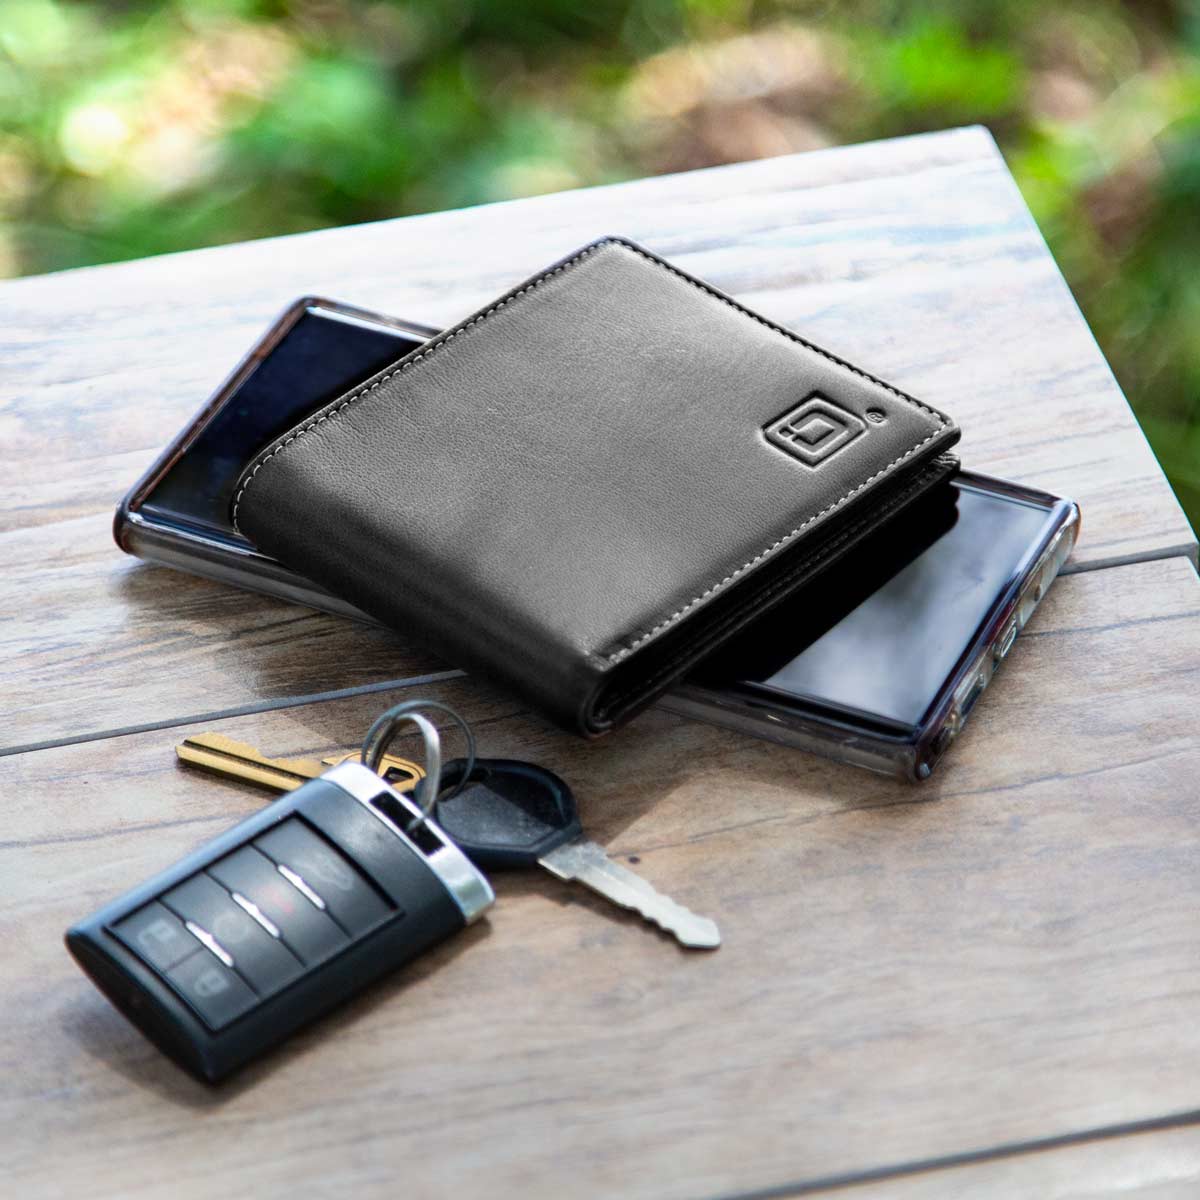 ID Stronghold  Men's Leather RFID Wallet 10 slot Bifold